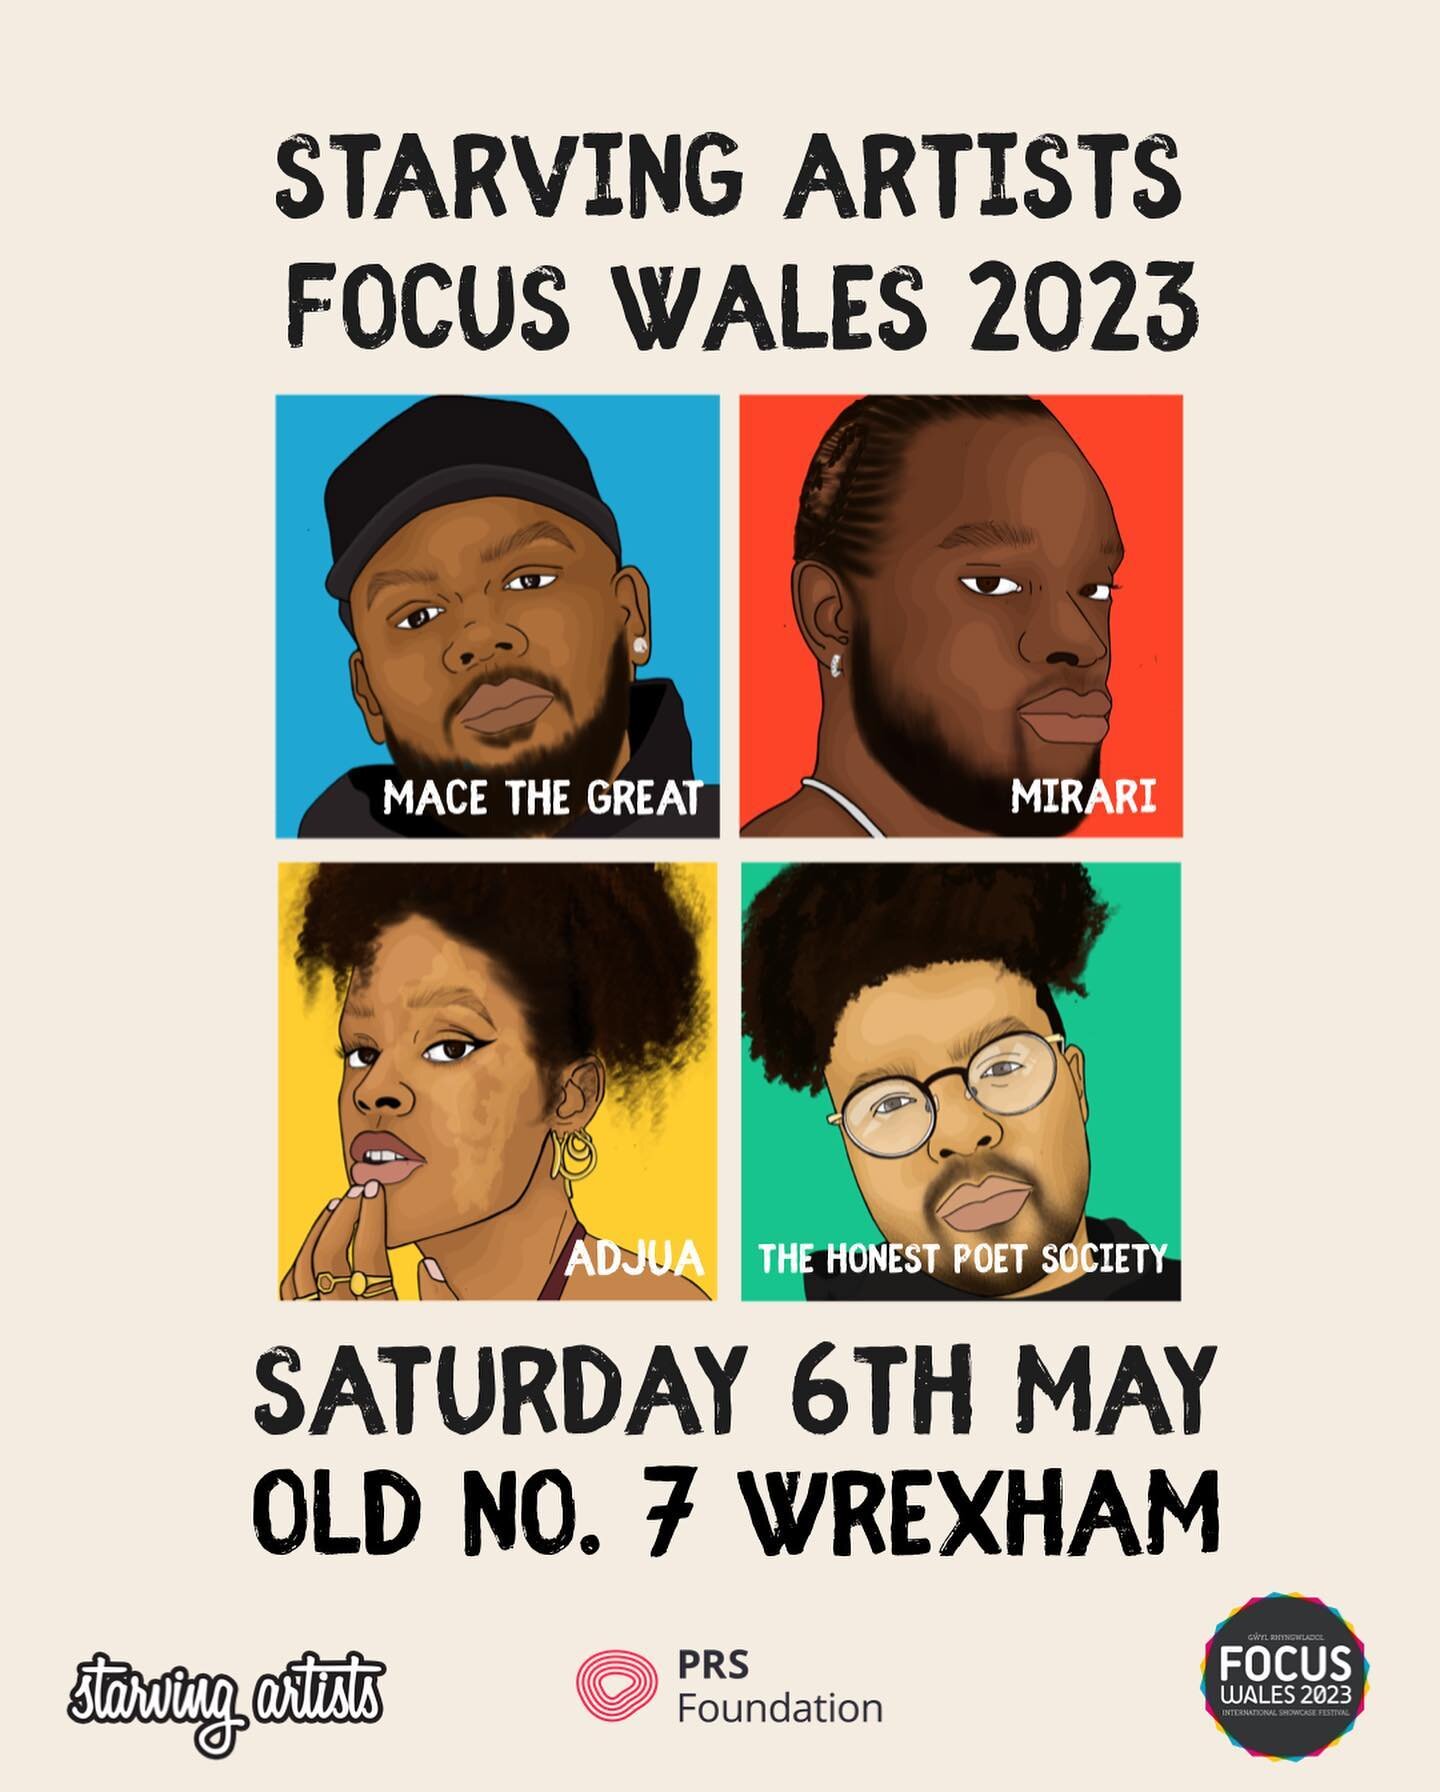 We excited to announce Staving Artists will be at @focuswales! We have 4 amazing emerging artists from cardiff! 

💥@macethegreat_ 
💥@thehonestpoetmusic 
💥@mirarimore 
💥@adjuasings_ 

6th May 2023

Old No.7 Wrexham

Join us and catch the real vibe